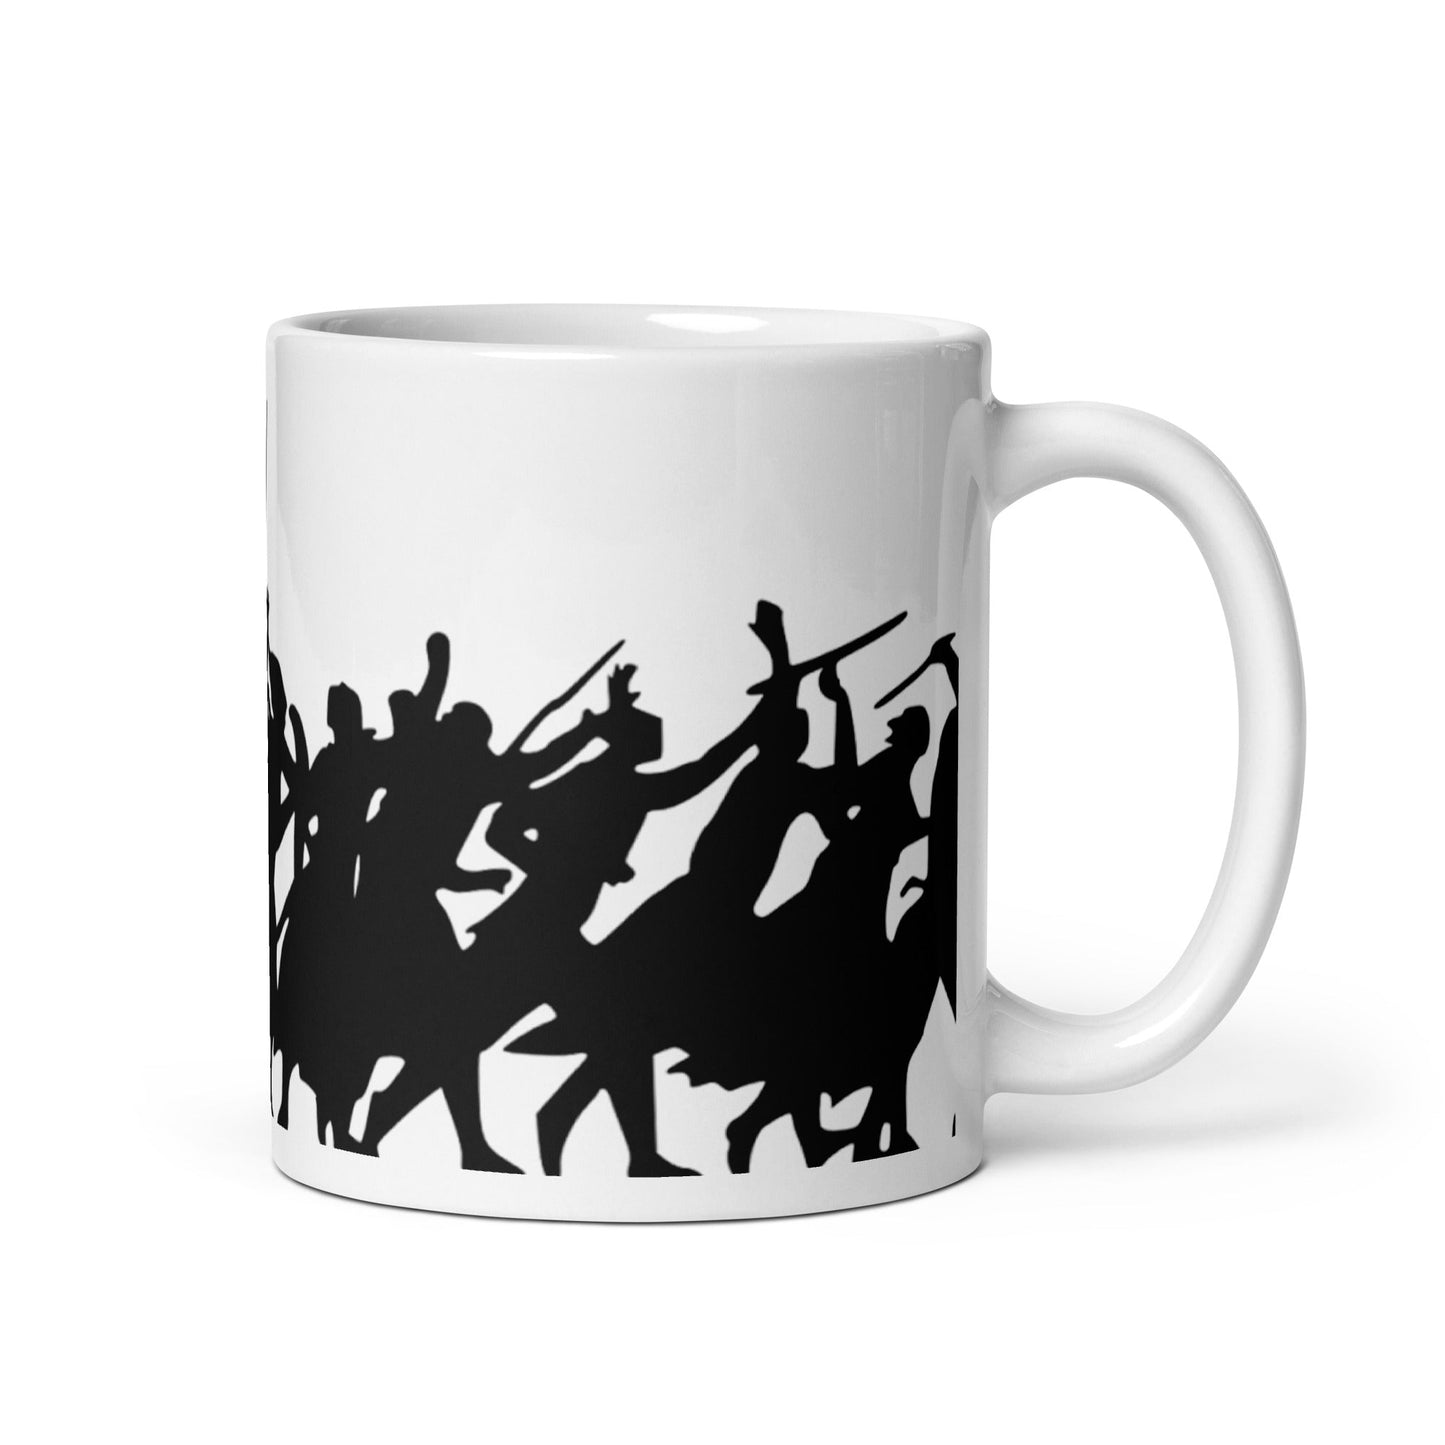 Protest - glossy mug - Souled Out World